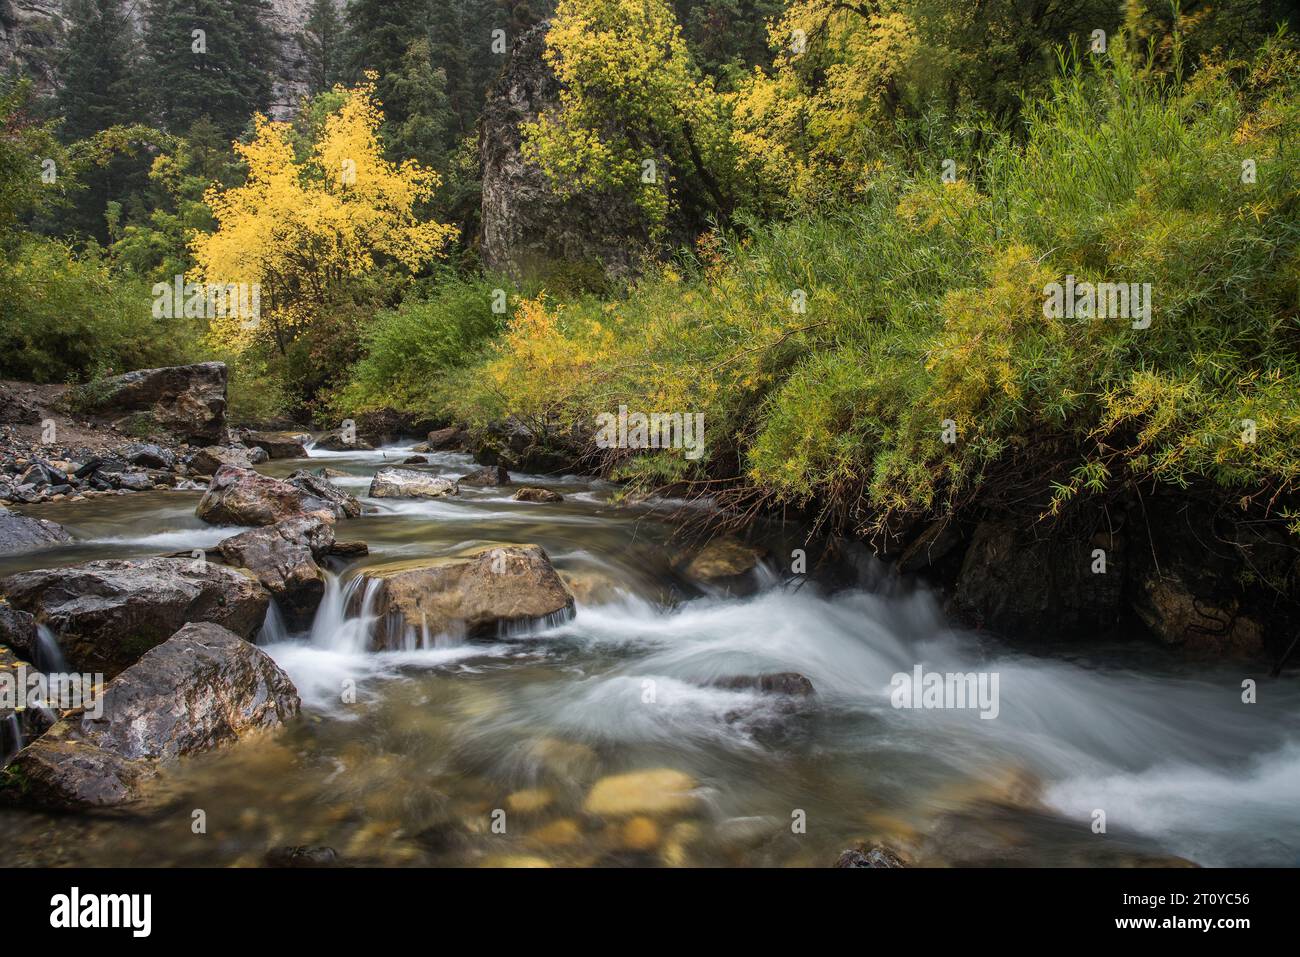 Autumn colors and majestic scenery along the famous Alpine Loop, Utah, USA. Stock Photo